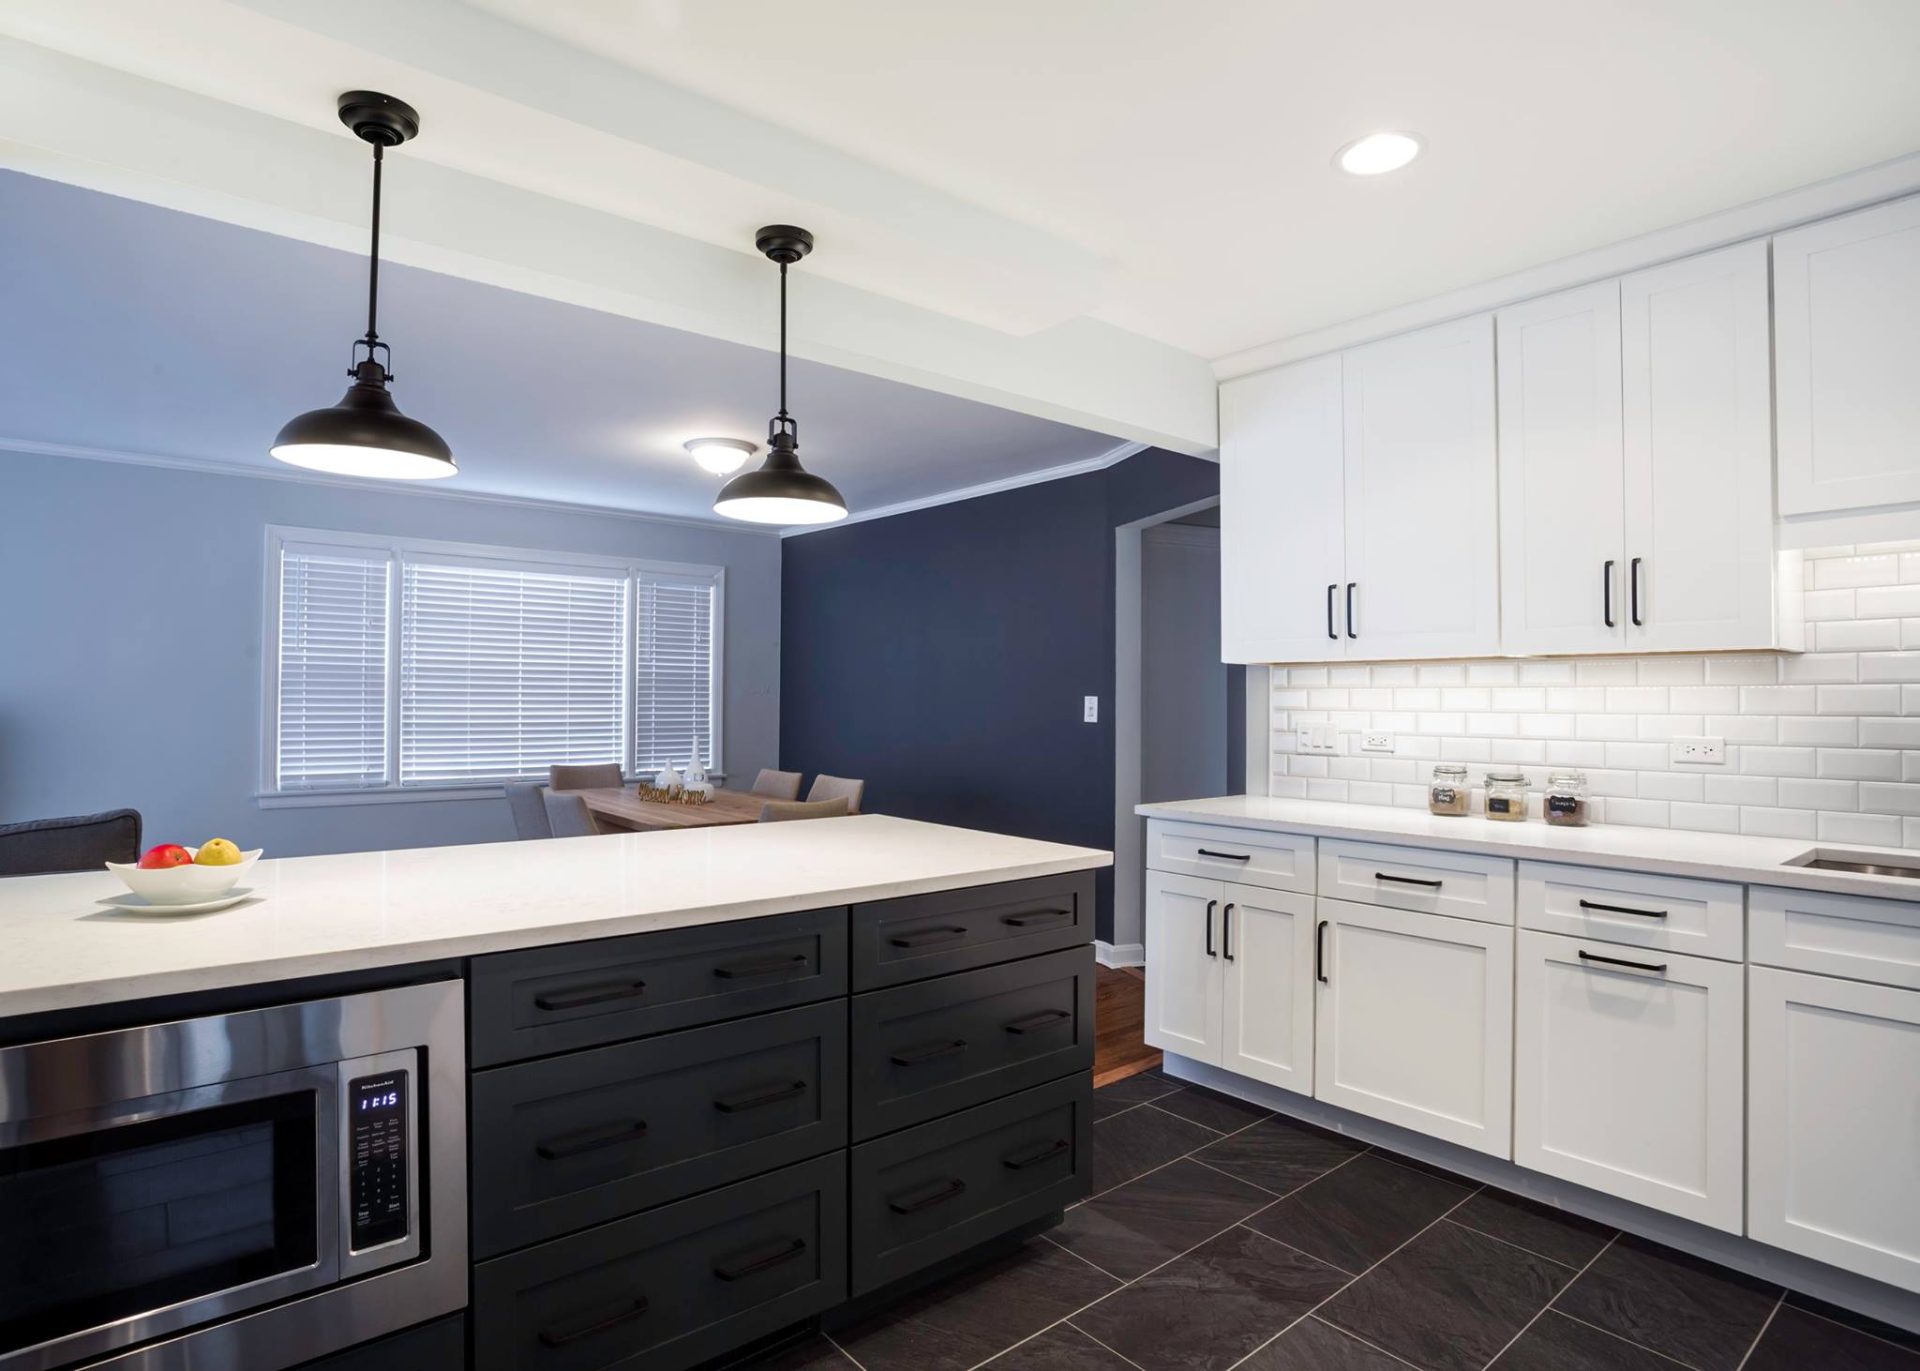 Full kitchen remodel with two tone cabinets, black hardware, black matte faucet, white quartz, white subway backsplash tiles, stainless steel appliances, peninsula, pendants above peninsula, can lights, large floor tiles, build-in microwave in peninsula